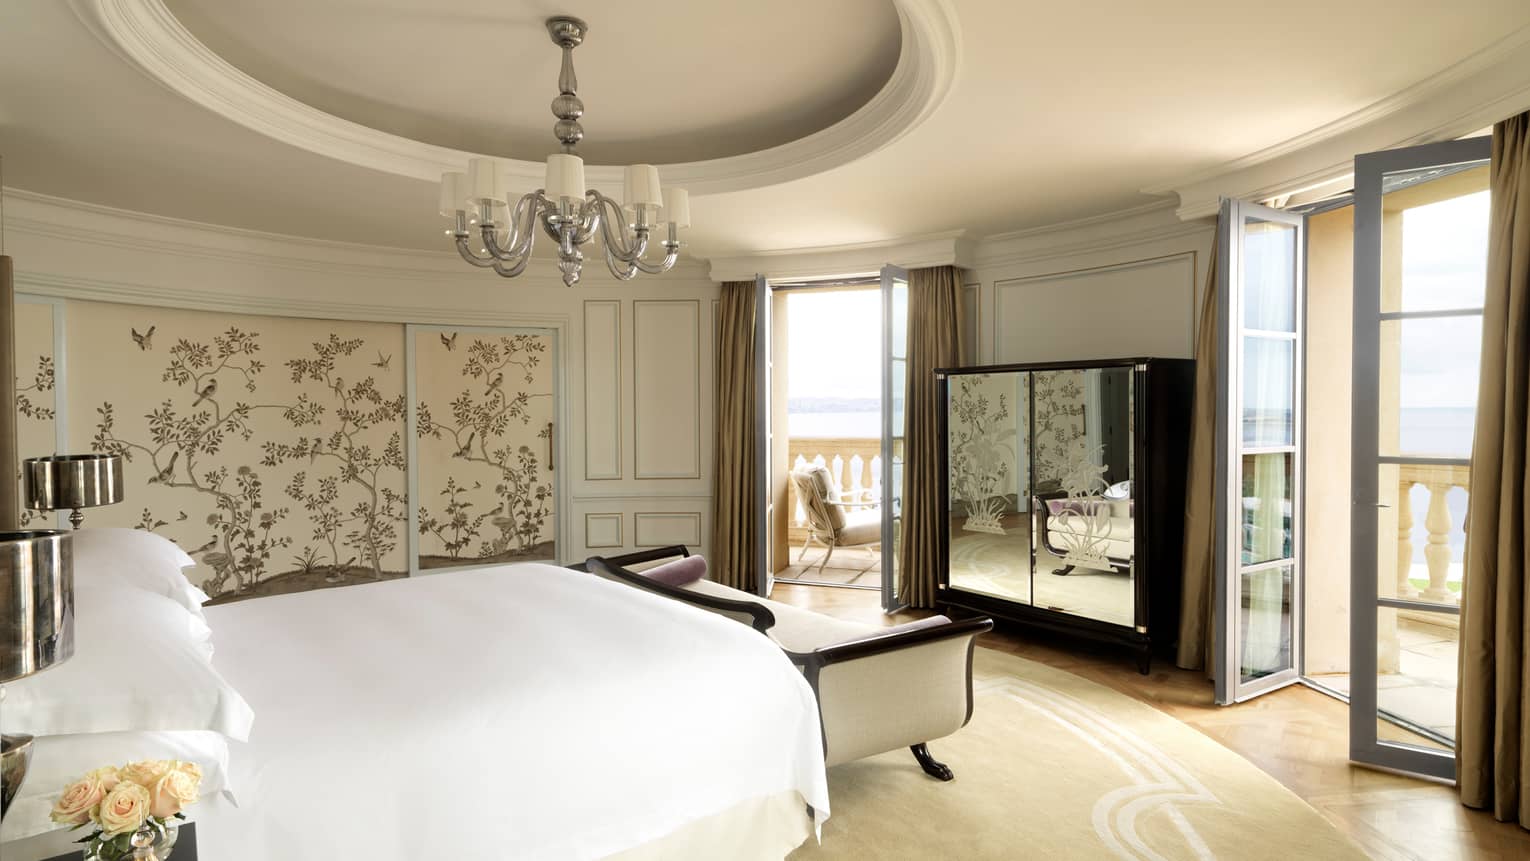 Round hotel room with recessed dome in ceiling, small chandelier, bed with white chaise, mirrored dresser, two patio doors